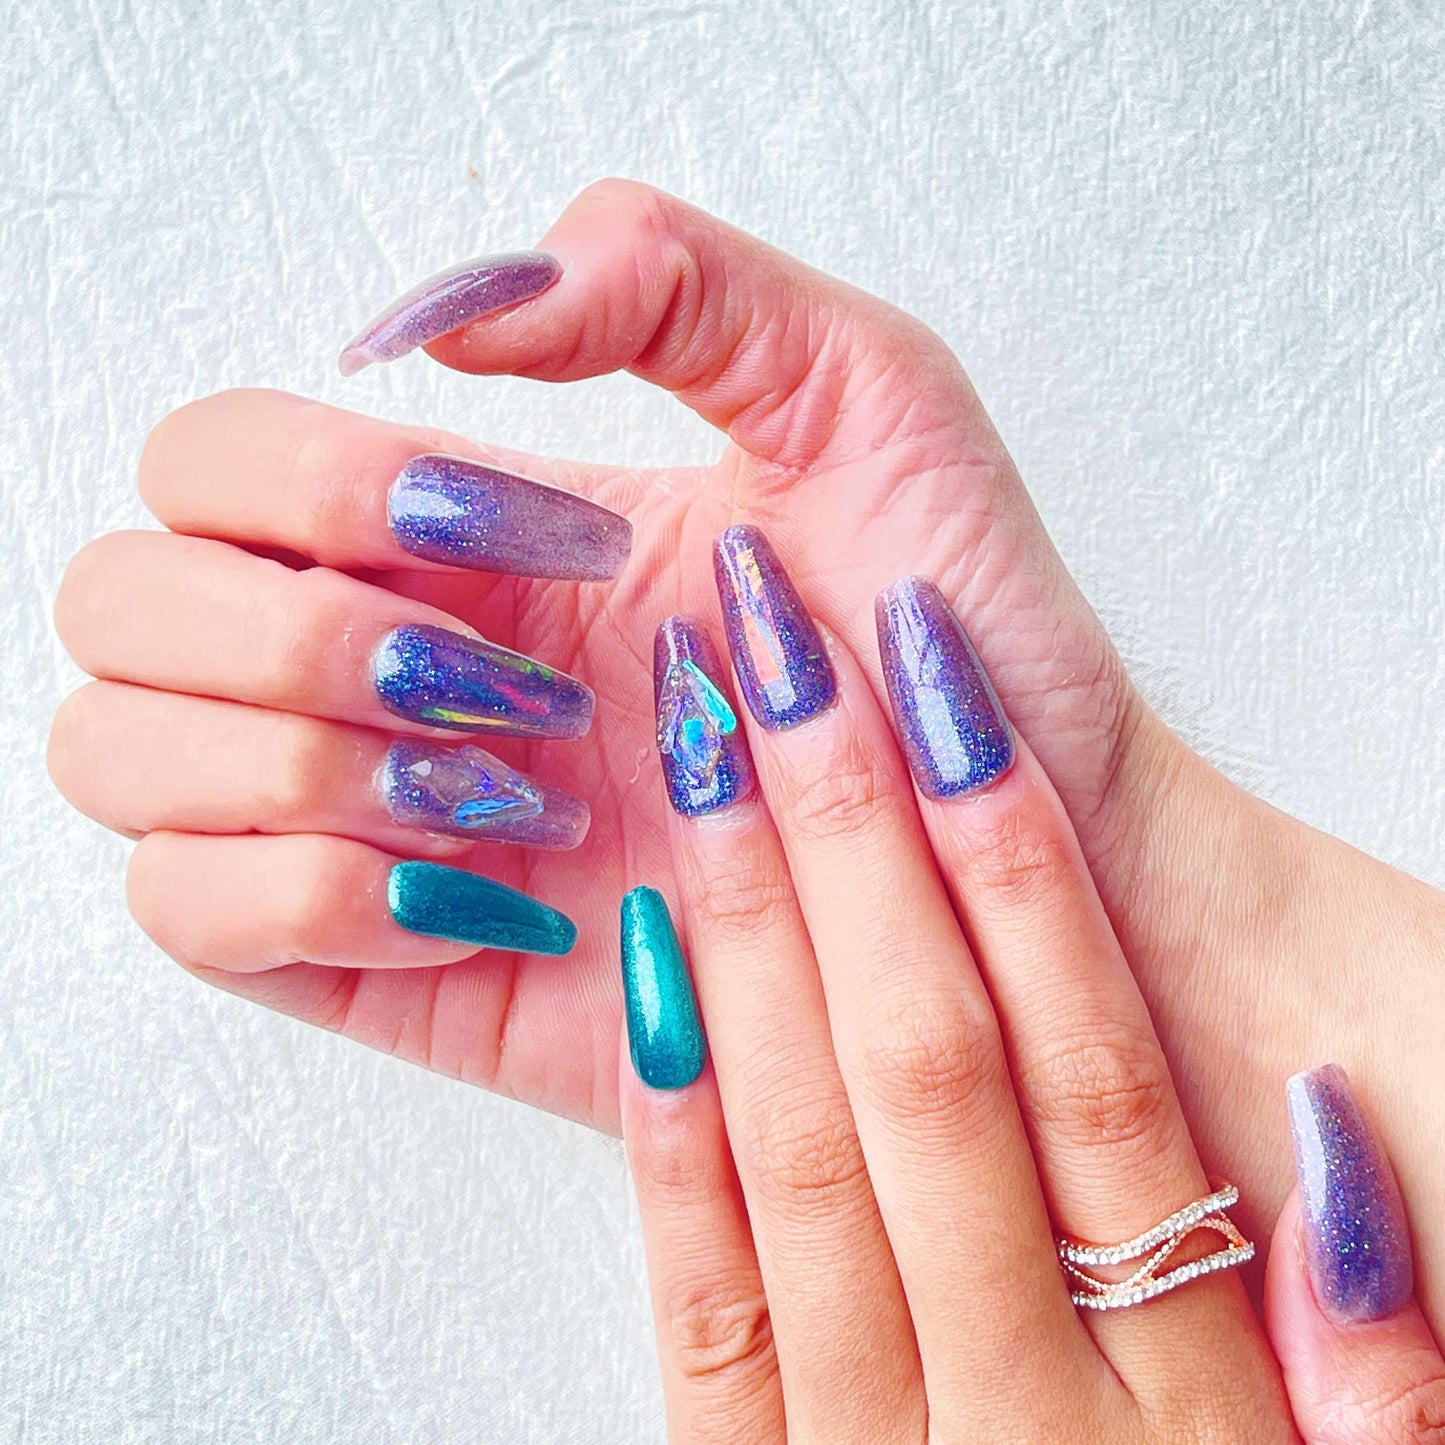 [FULL SET GLITTERING] Teal Blue and Purple Moonlight Glittering Long Press-On Nails - Belle Rose Nails